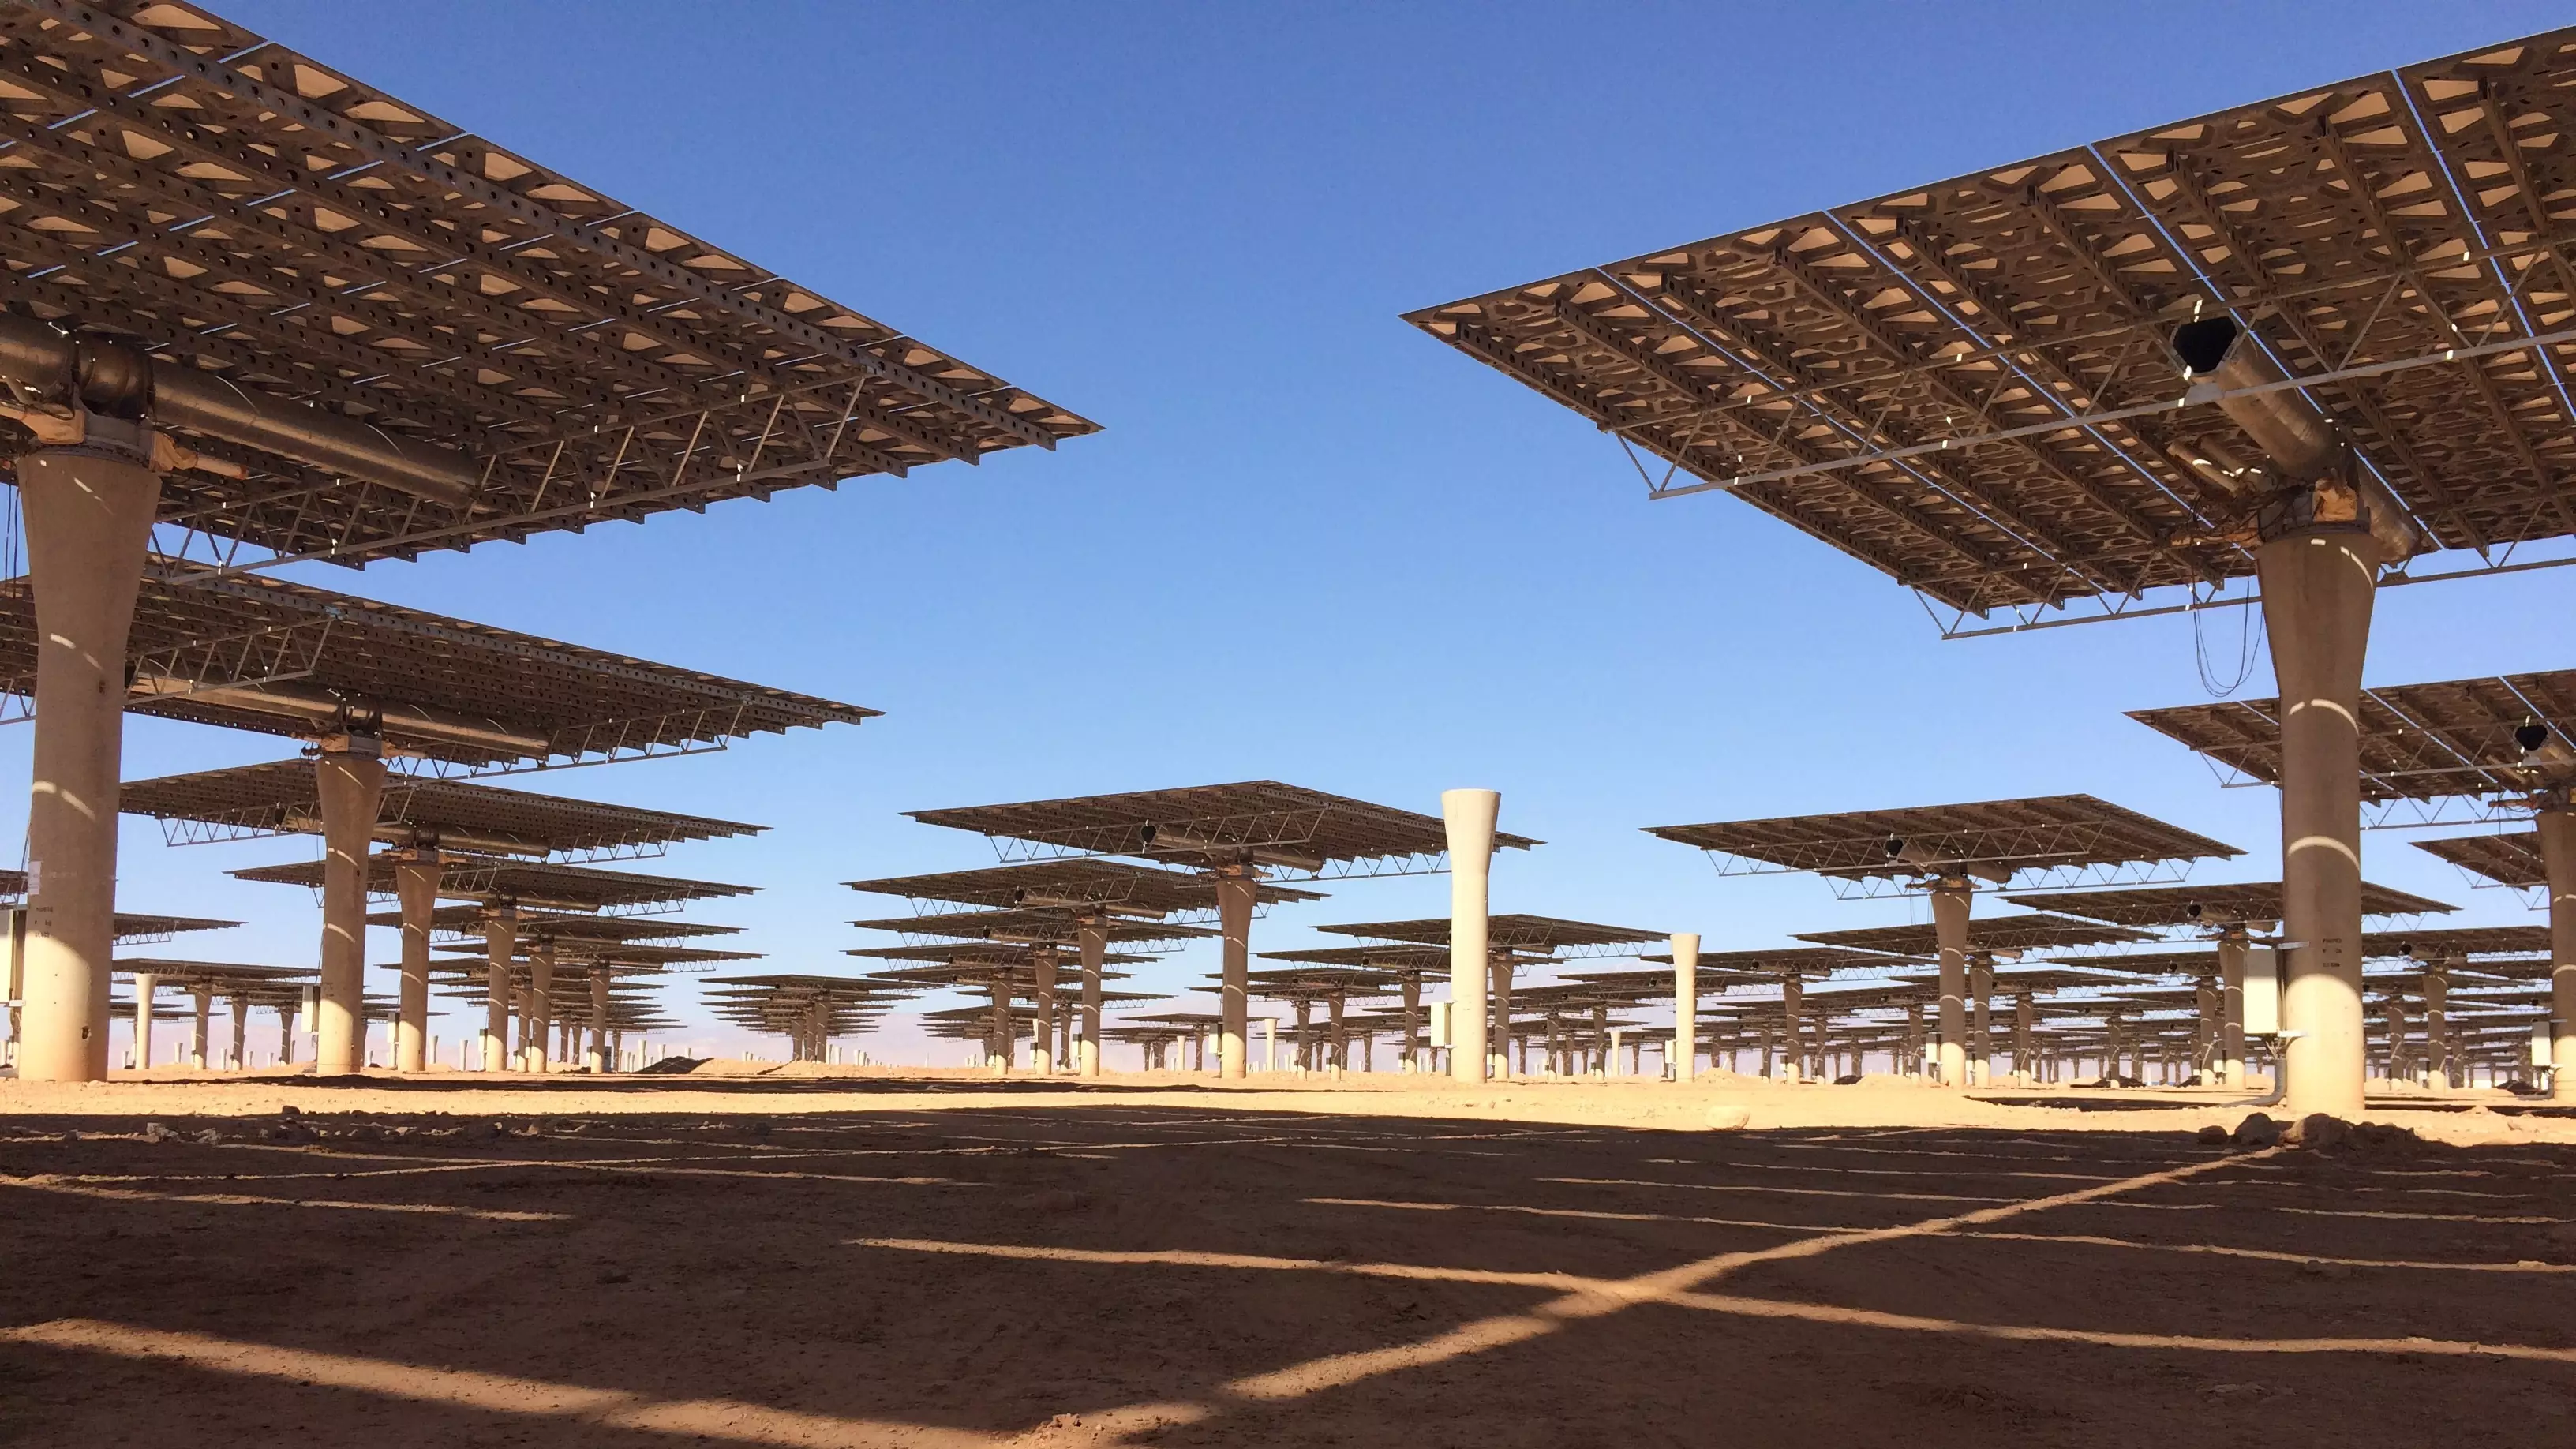 Saudi Arabia's Incredible Plan To Create The World's Largest Solar Power Plant